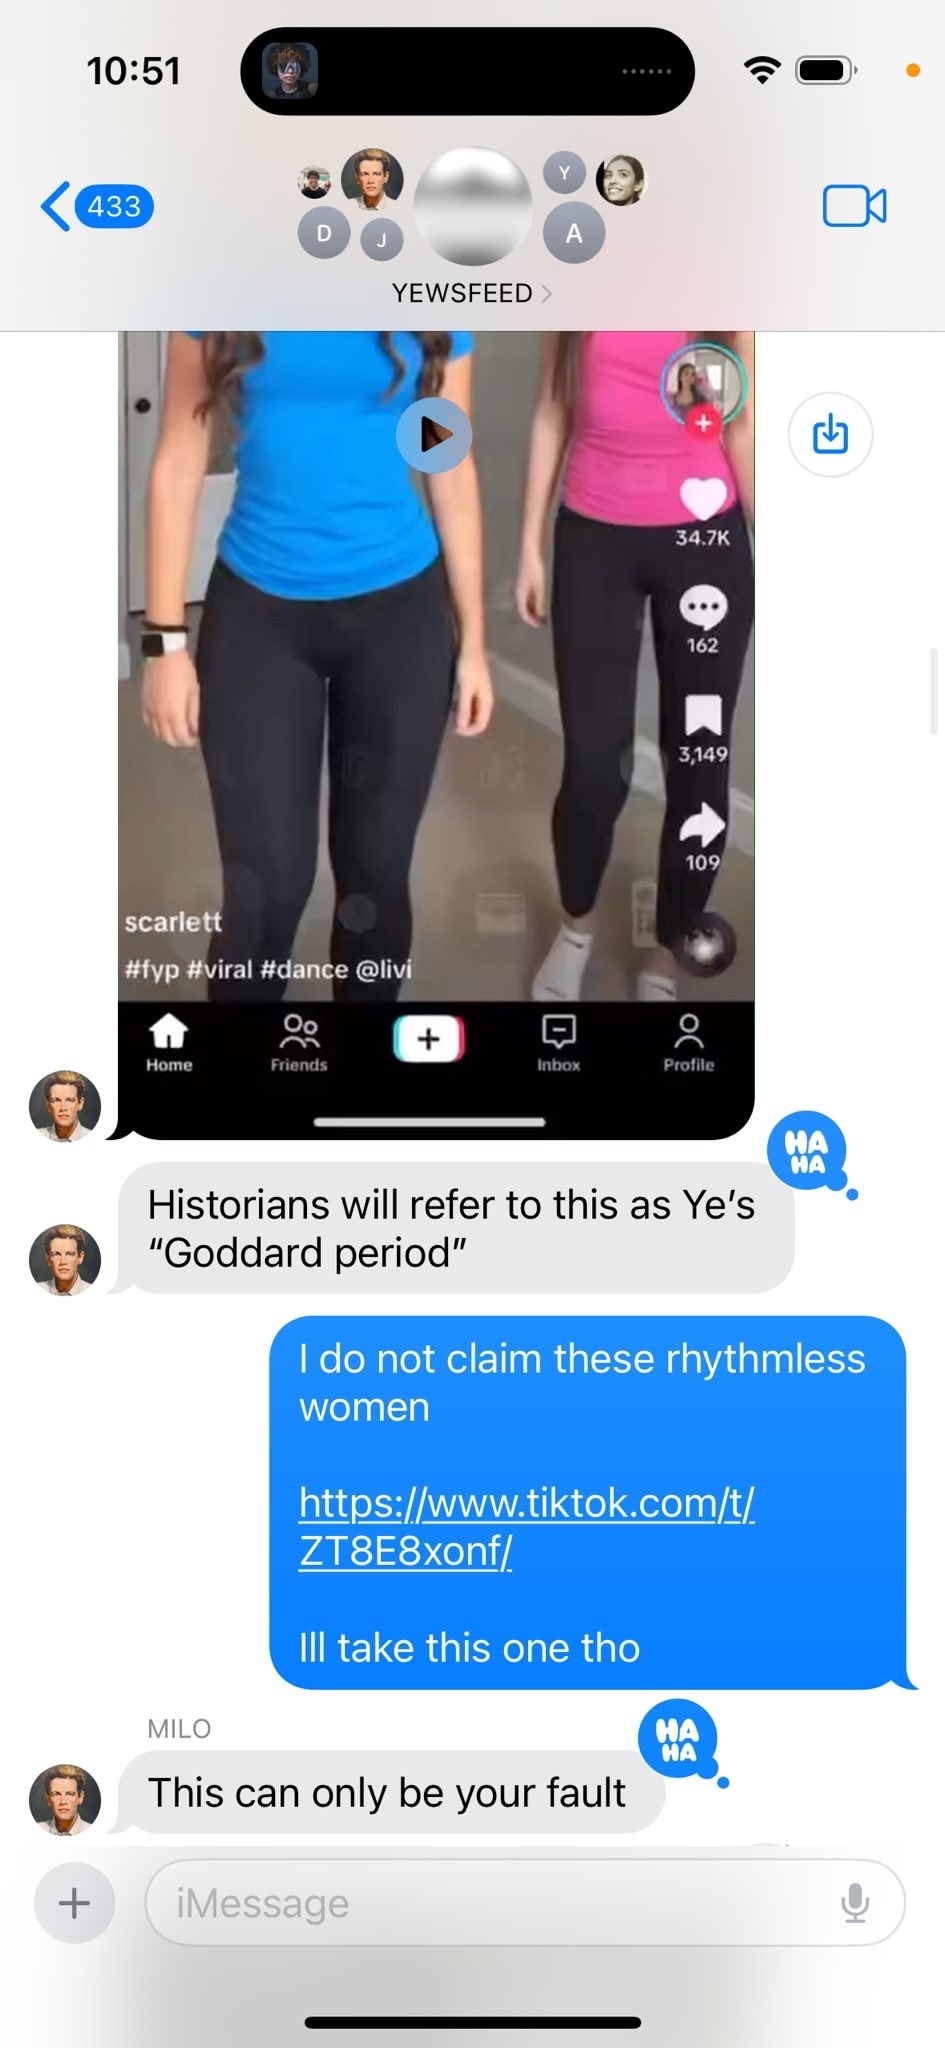 Two individuals in a TikTok video, one wearing a blue top, the other in black, posed to start a dance. Text overlay contains a humorous comment